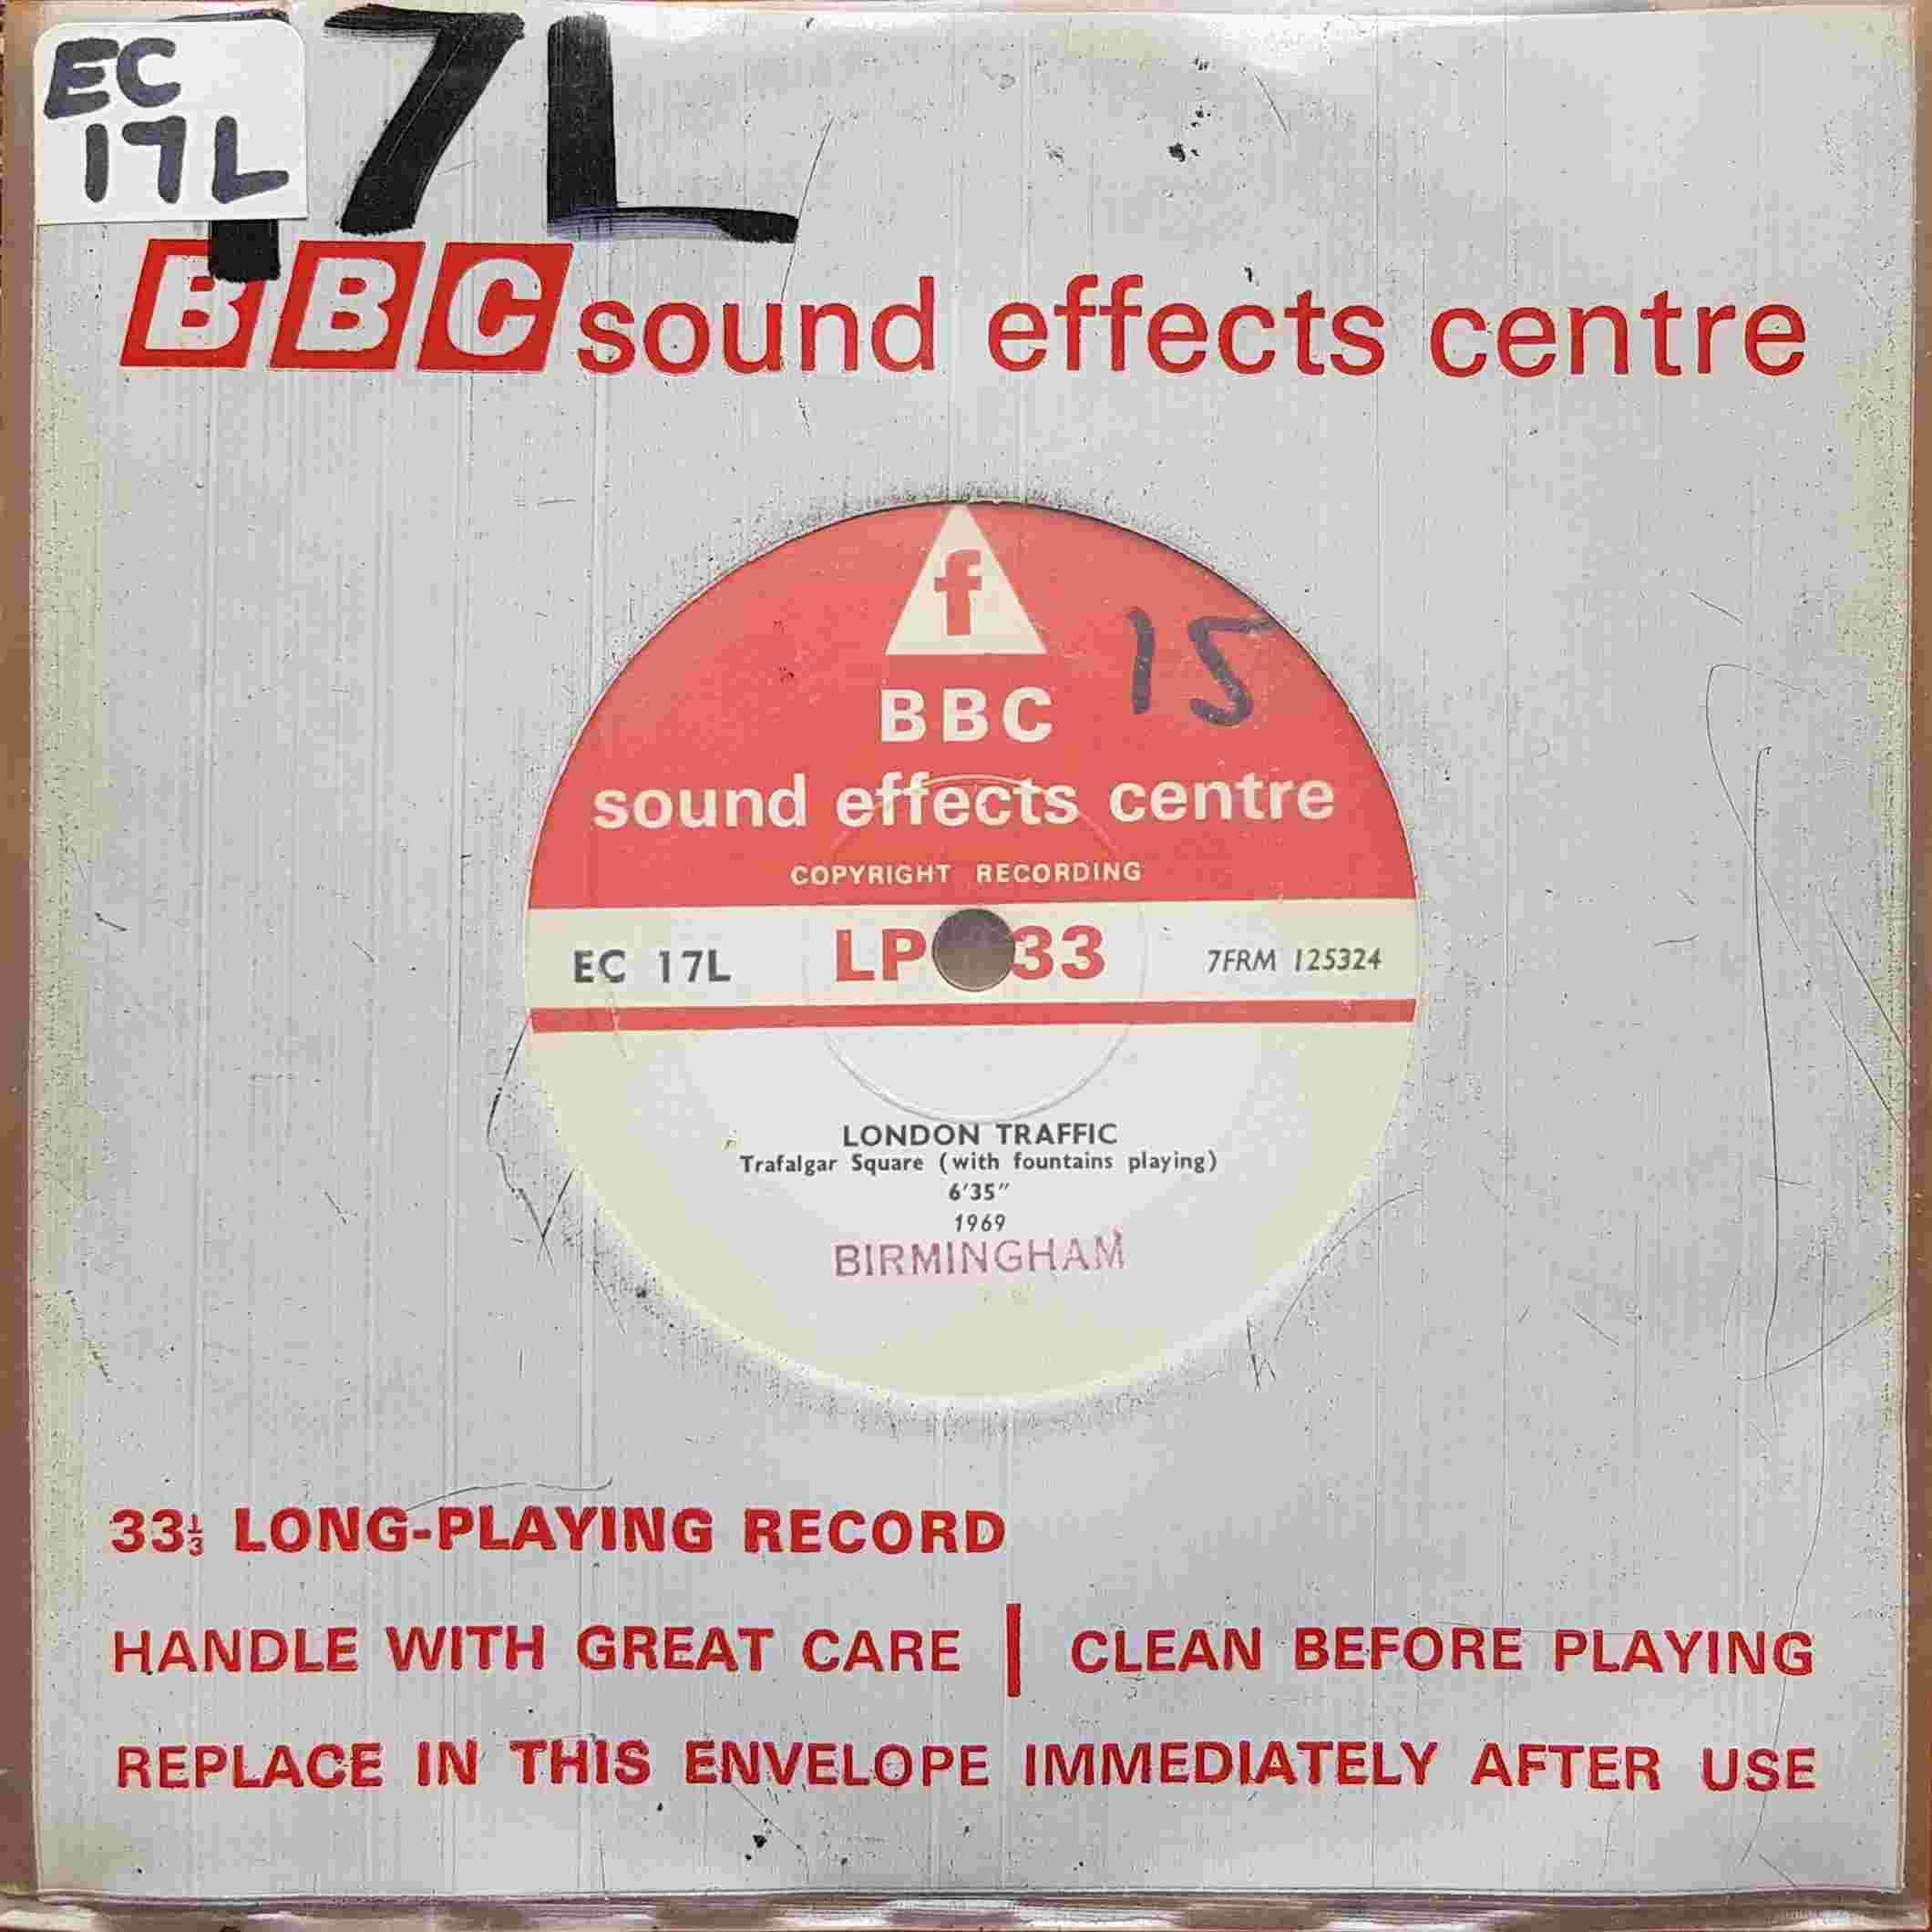 Picture of EC 17L London traffic by artist Not registered from the BBC records and Tapes library